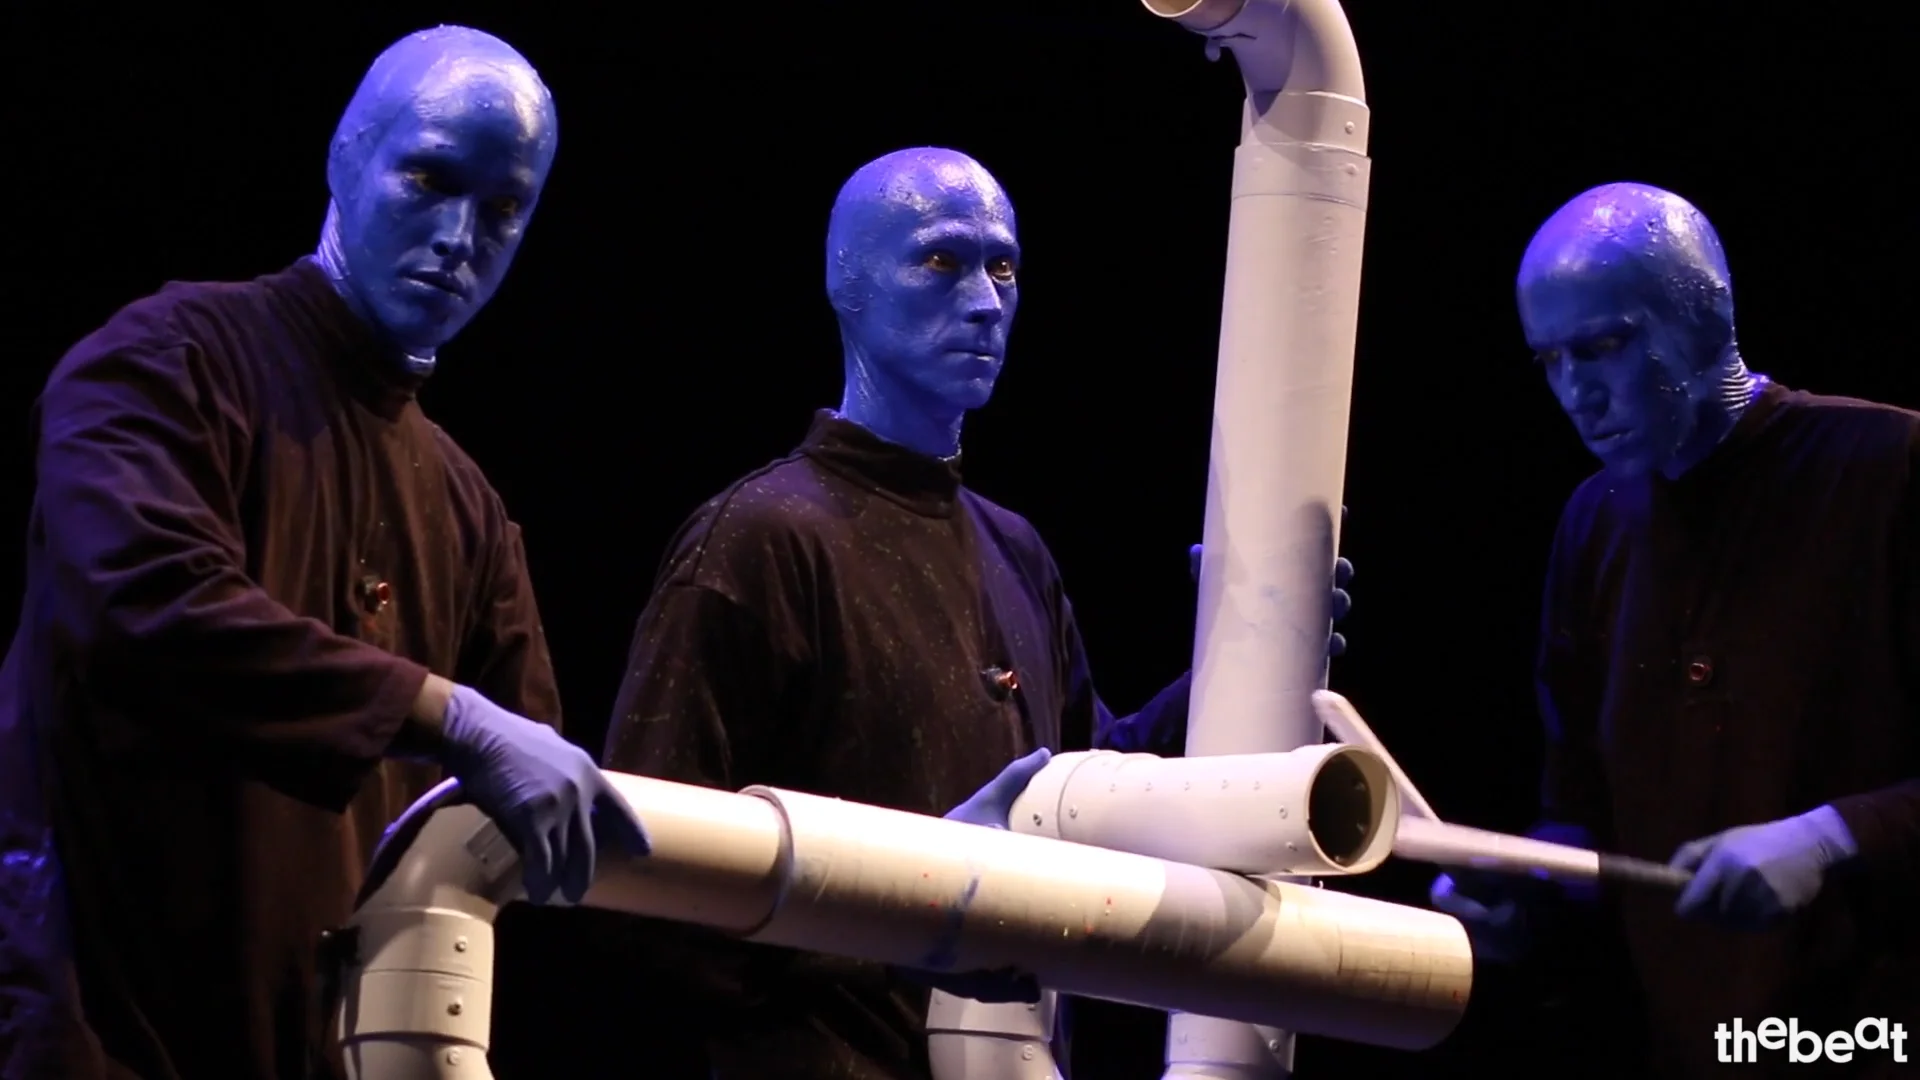 Captain Of Blue Man Group Mark Frankel On Group's 30th Anniversary, What's  Next: 'People Are Craving To Be Together' - CBS New York